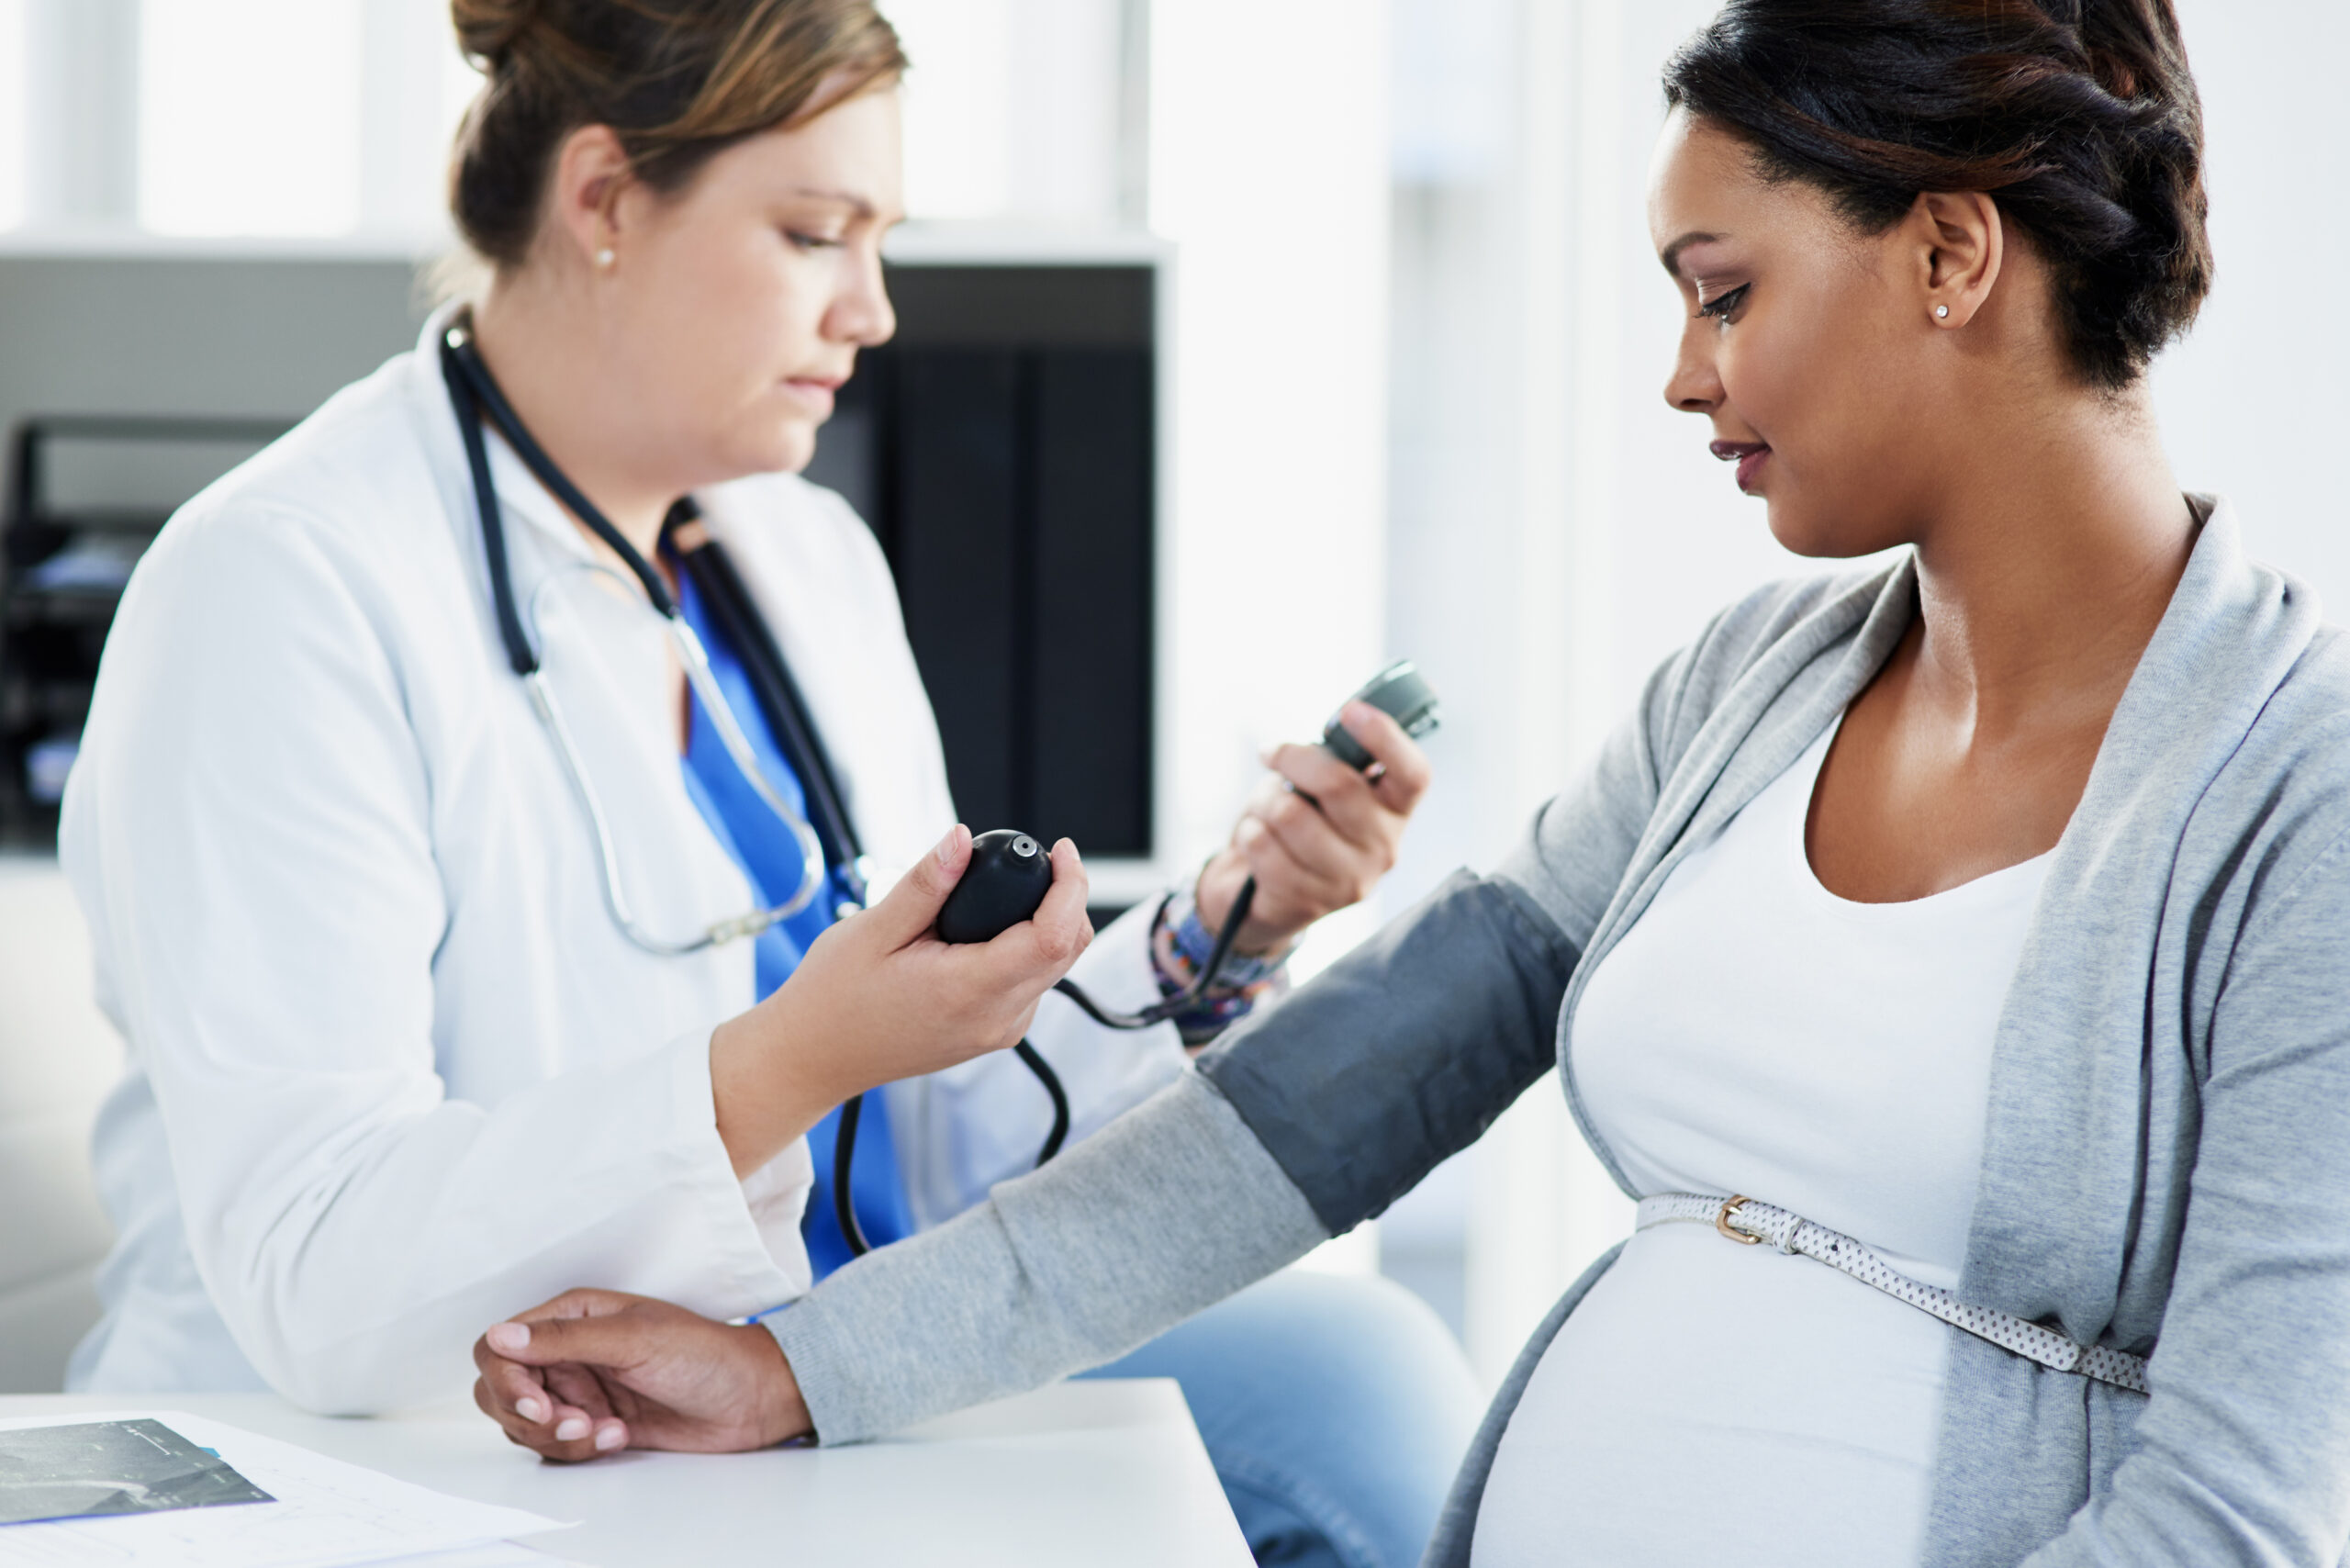 A pregnant woman with a darker skin tone gets her blood pressure checked by a health care provider with medium skin tone.